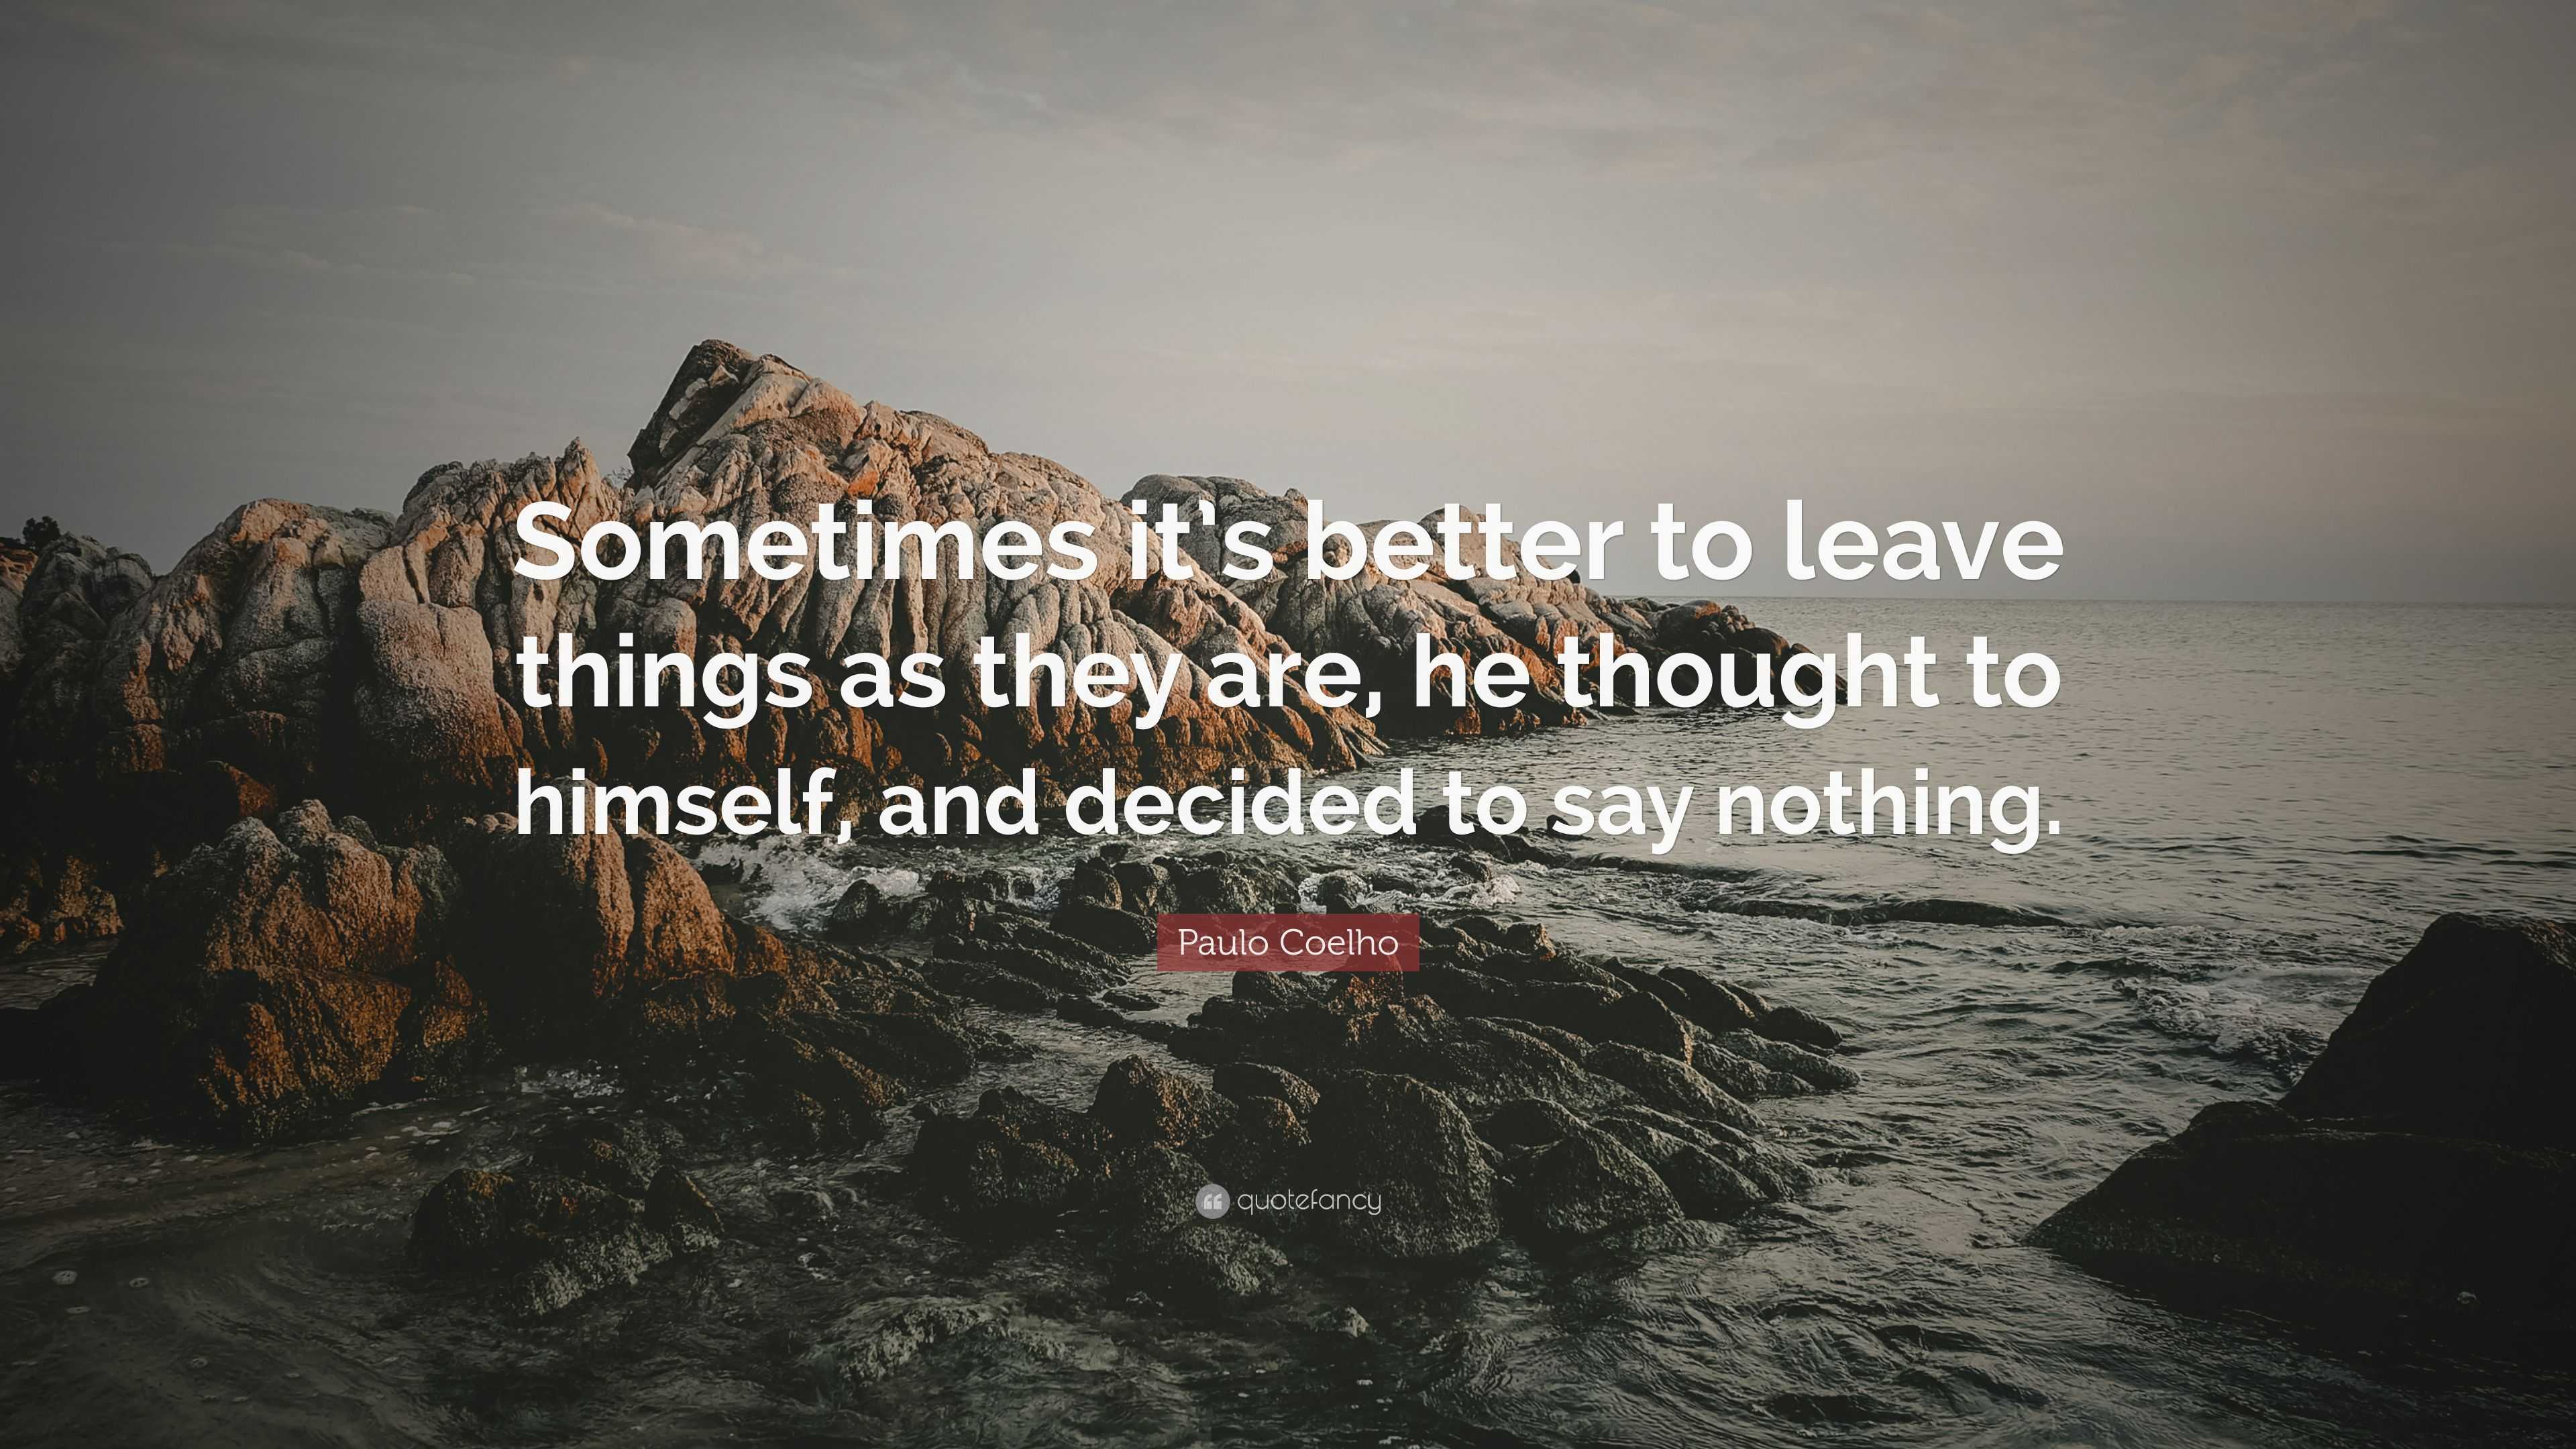 Paulo Coelho Quote: “Sometimes it’s better to leave things as they are ...